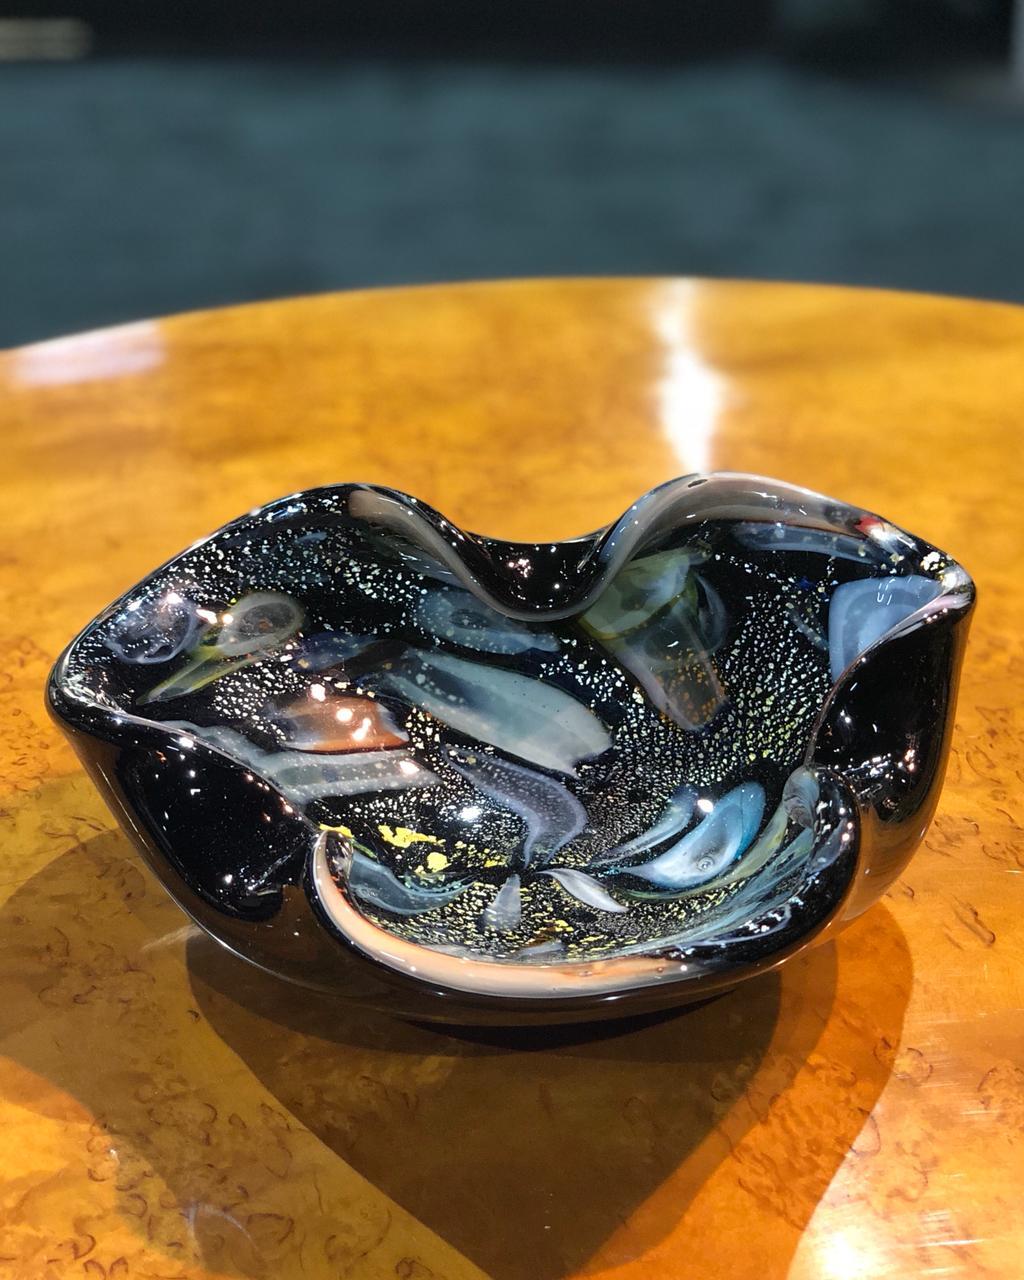 Murano.
With silver applications.
We have specialized in the sale of Art Deco and Art Nouveau and Vintage styles since 1982. If you have any questions we are at your disposal.
Pushing the button that reads 'View All From Seller'. And you can see